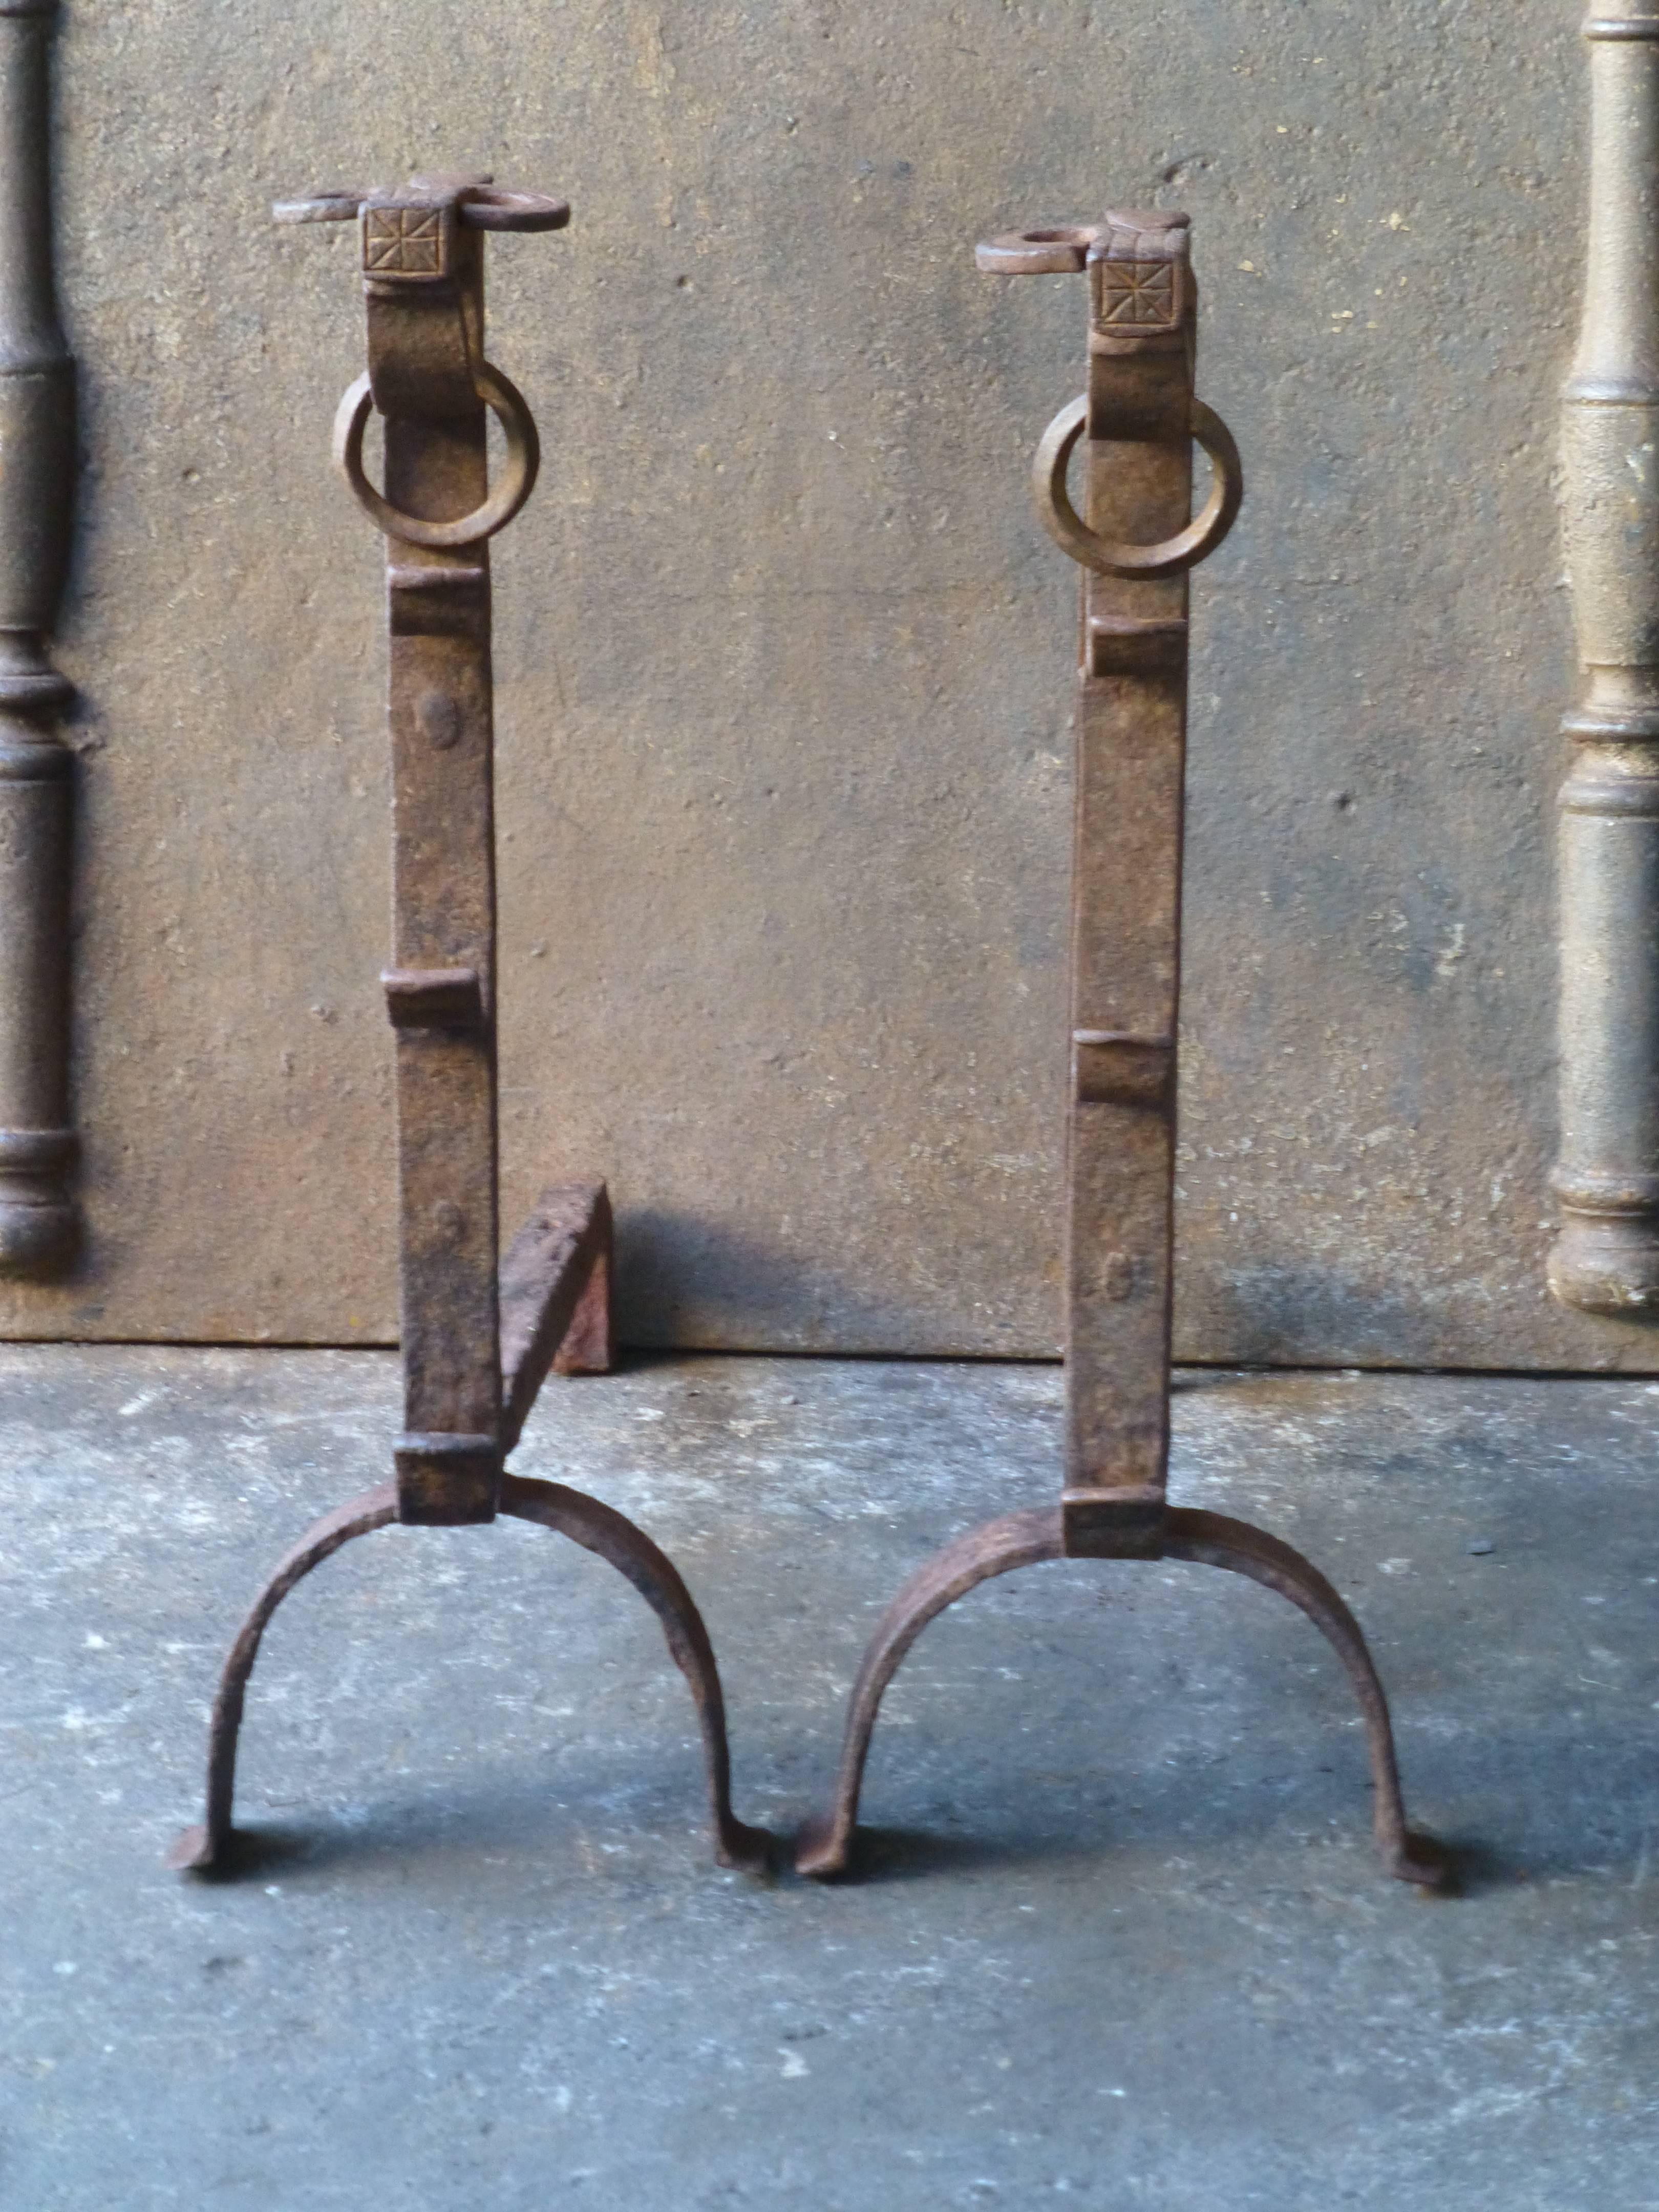 17th century Gothic bulls head fire dogs, andirons. These French andirons are called 'landiers' in France. This dates from the times the andirons were the main cooking equipment in the house. They had spit hooks to grill meat or poultry and